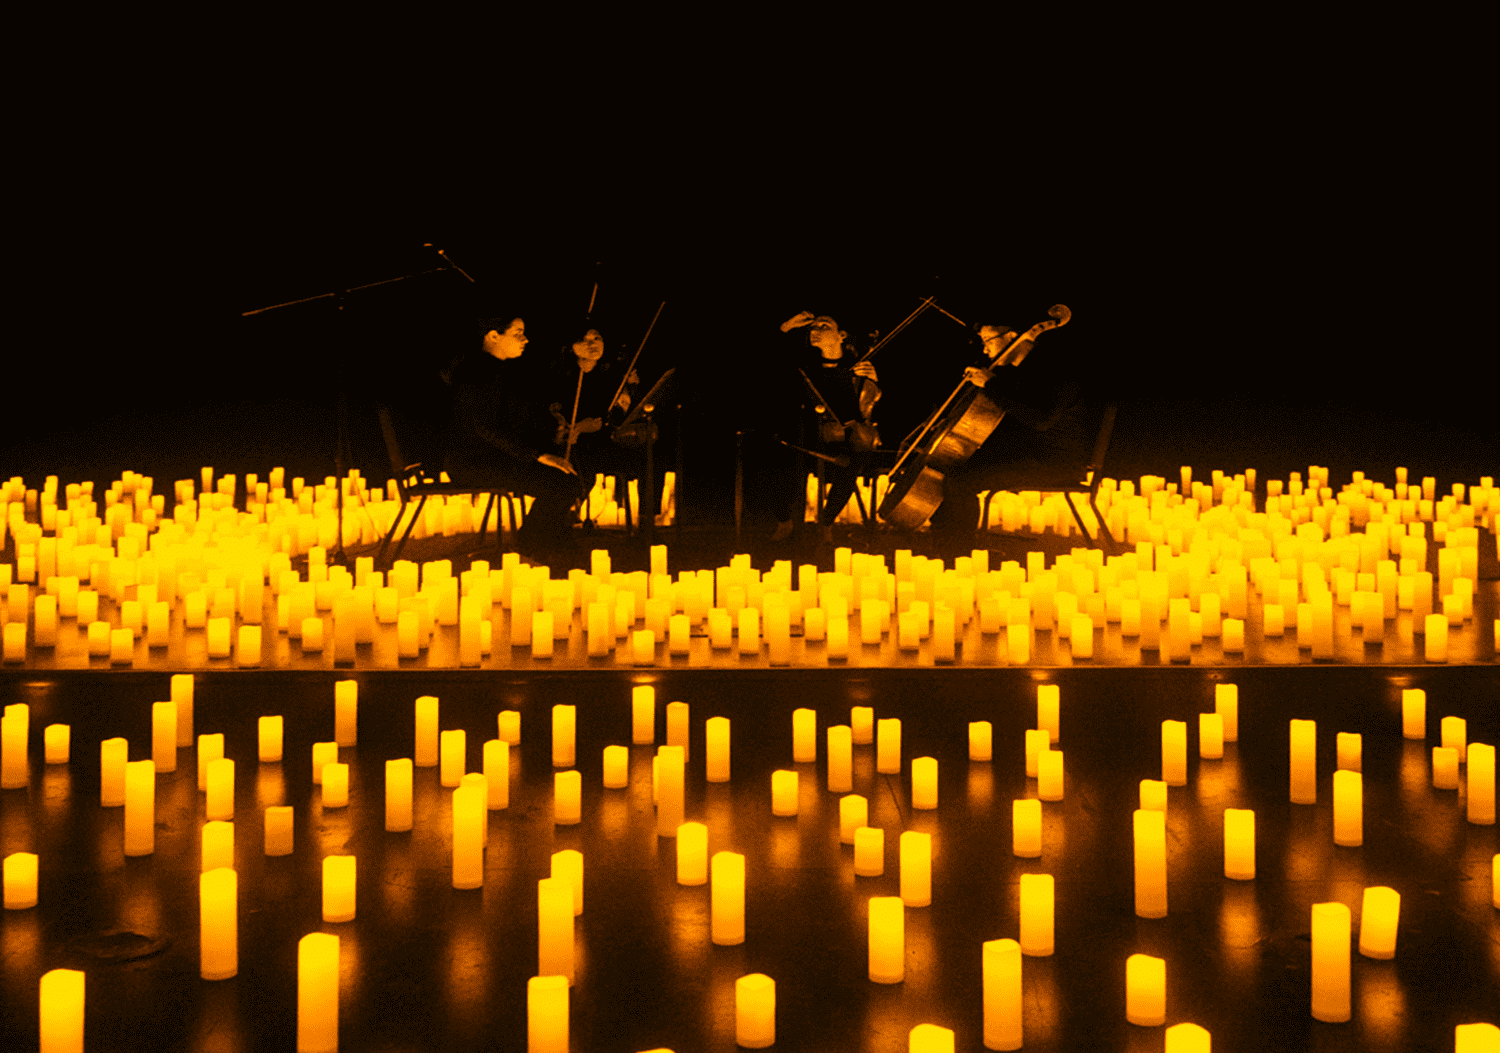 A string quartet performing at the center of a stage surrounded by candles.